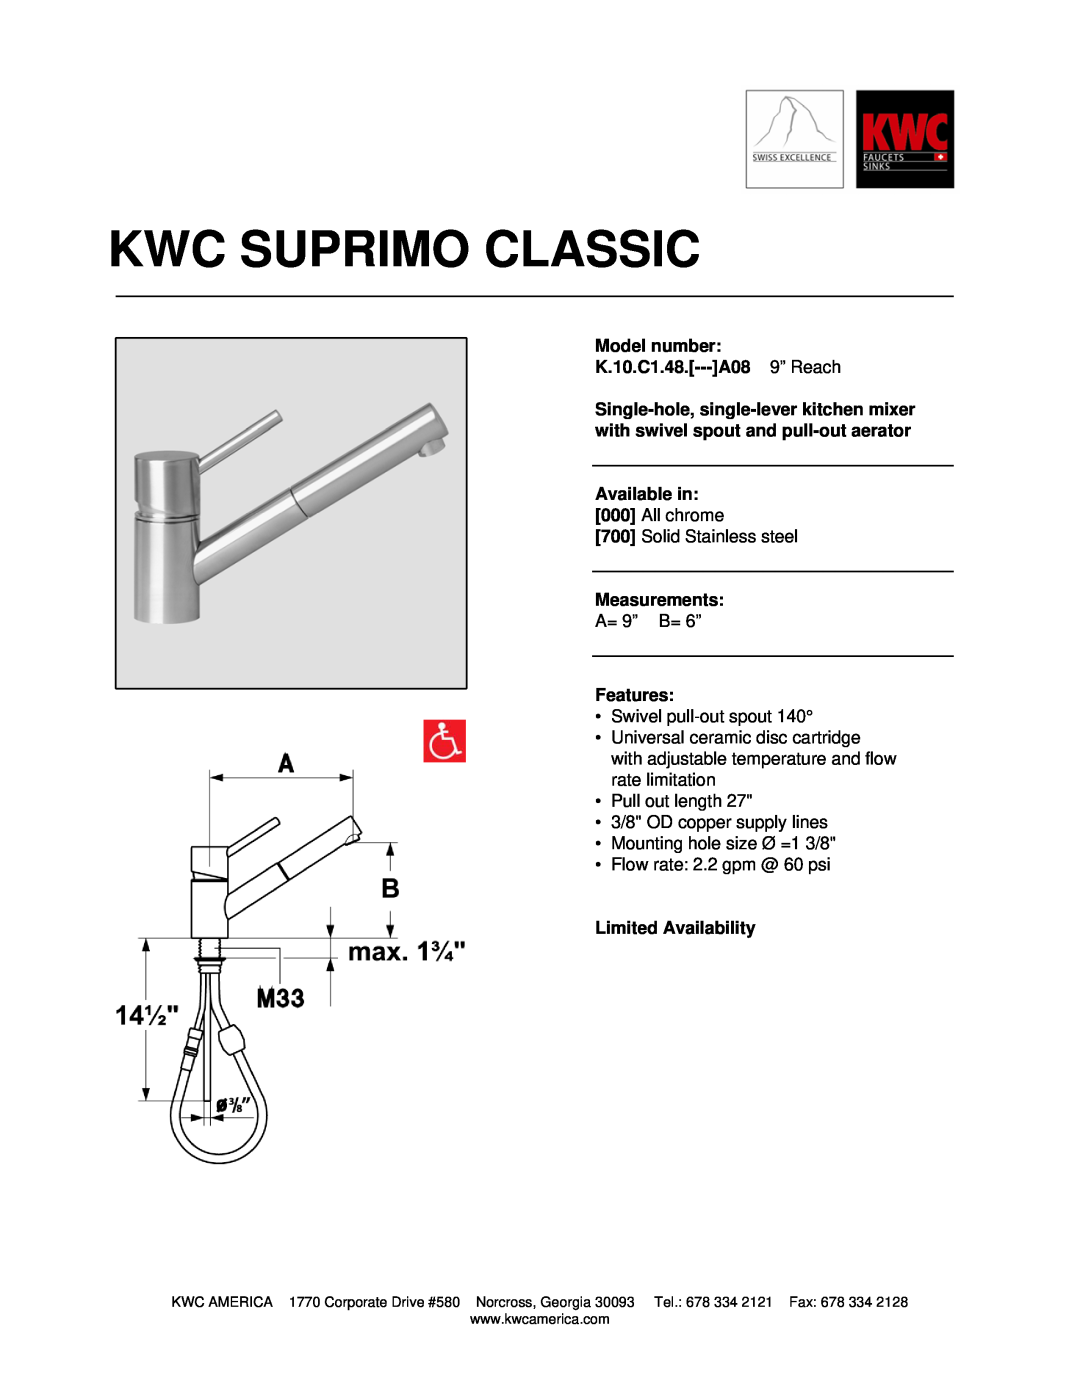 KWC manual Kwc Suprimo Classic, Model number K.10.C1.48.---A08 9” Reach, Available in, Measurements, Features 